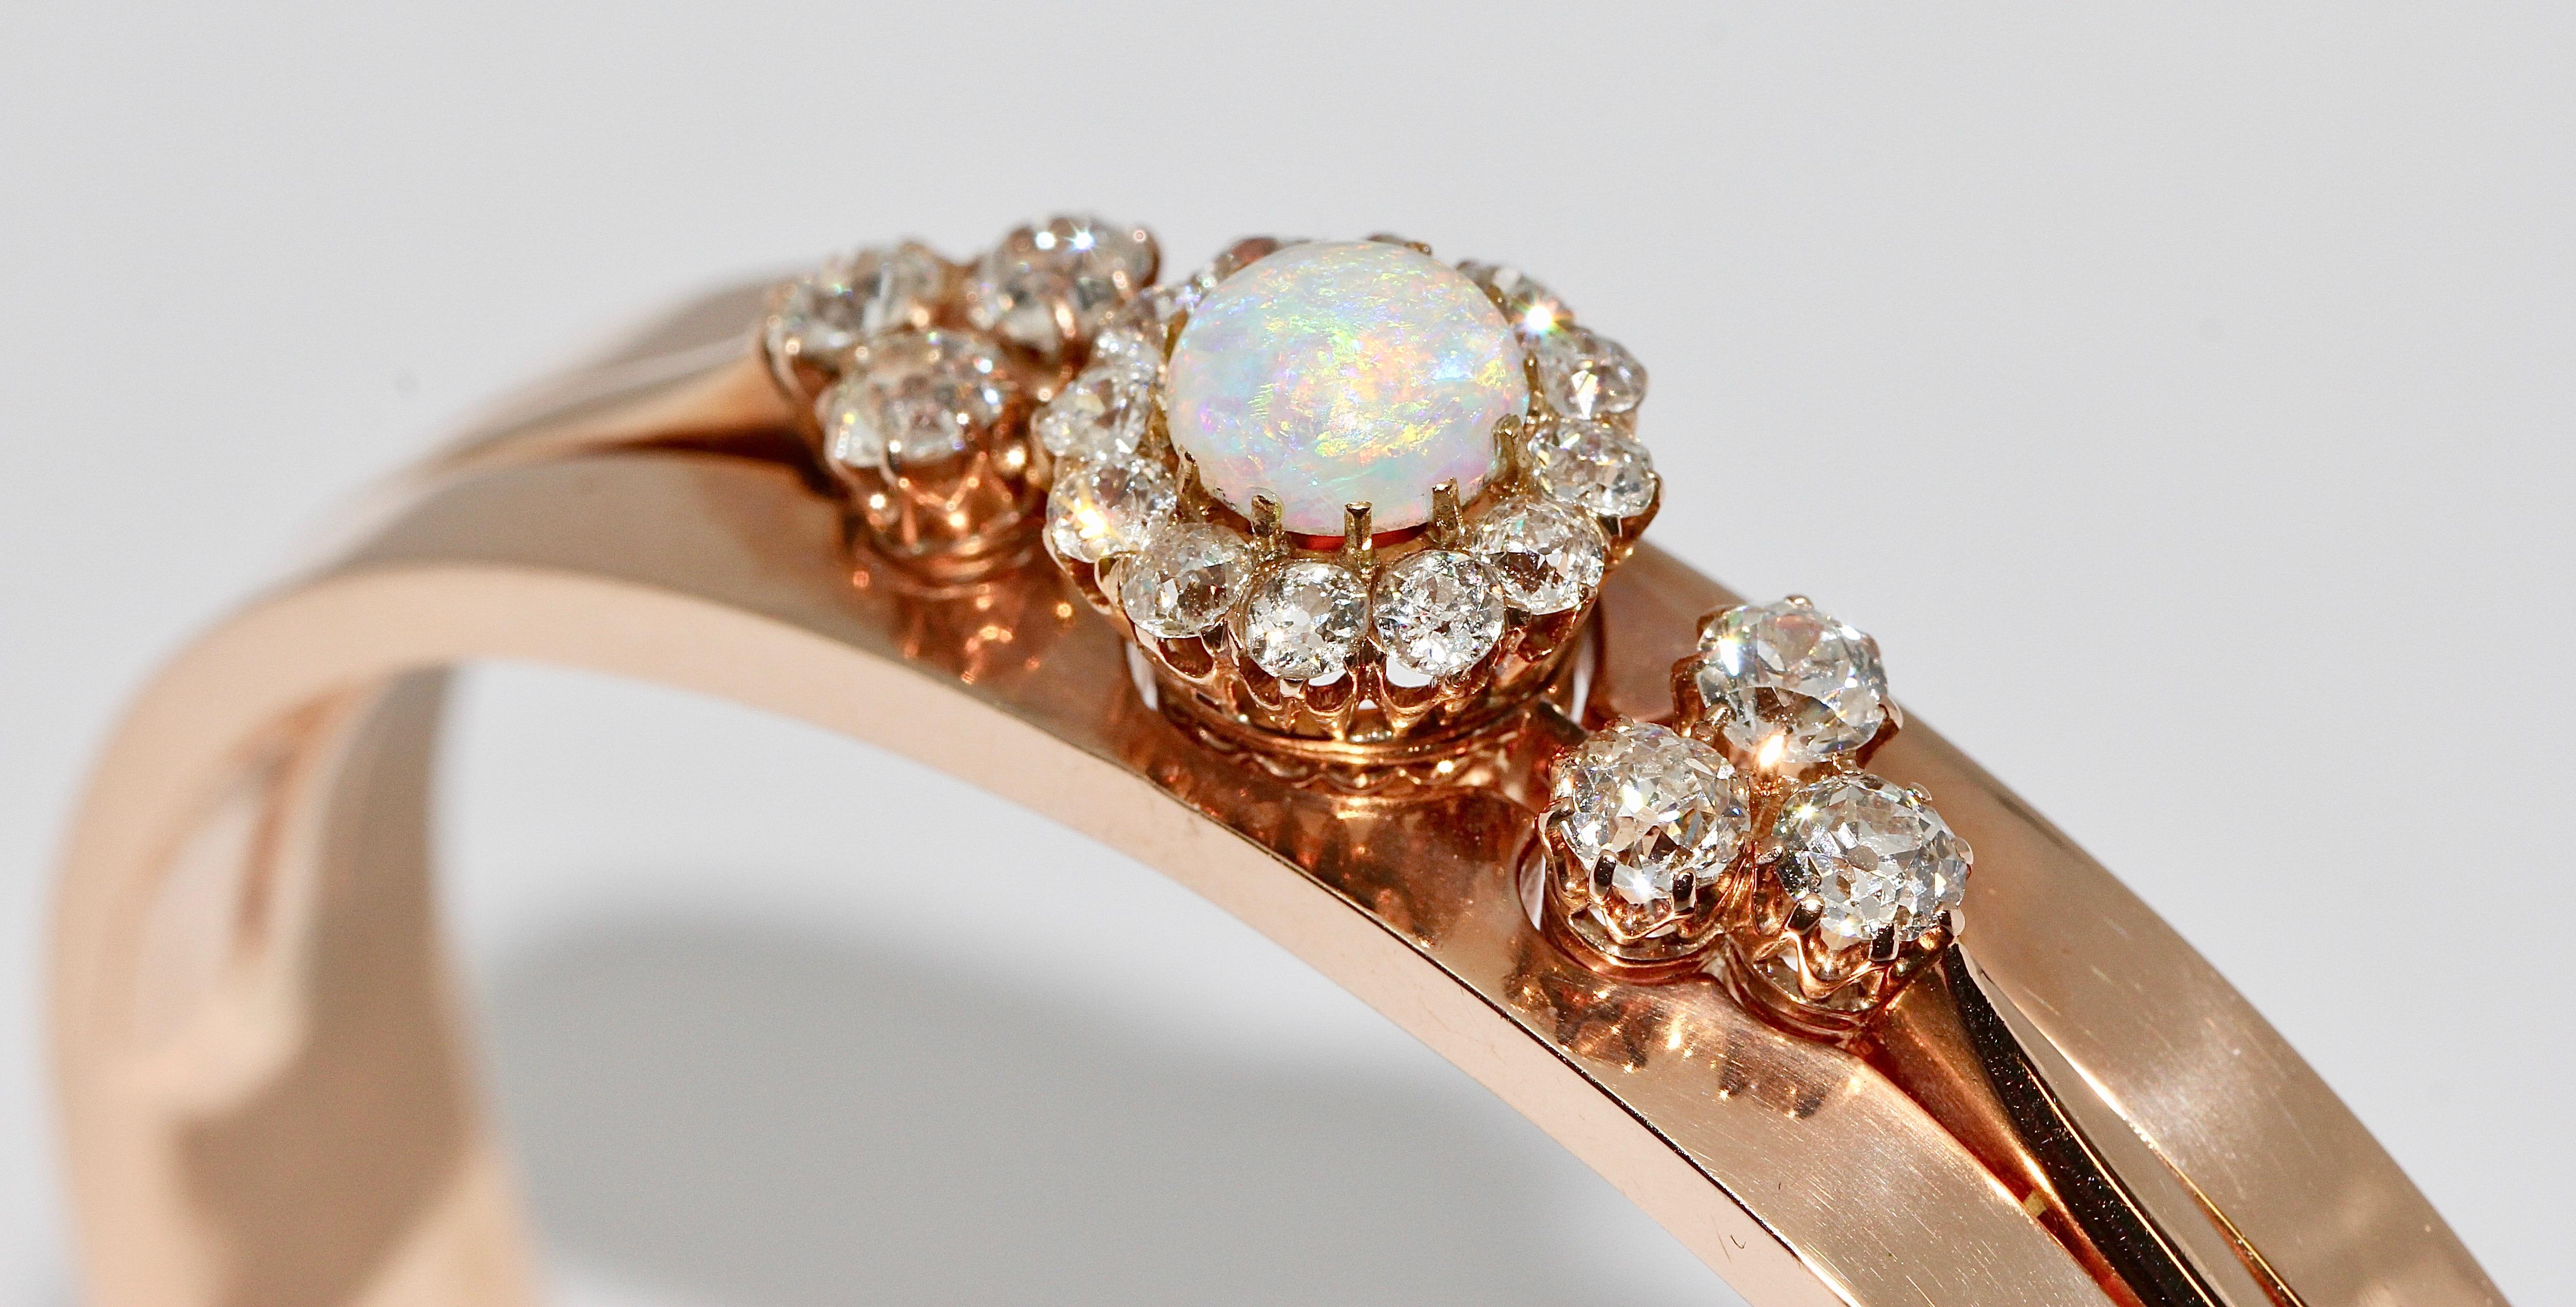 Antique ladies bangle with precious opal and diamonds. 14 Karat gold.

Magnificent ladies bangle, set with an Opal Cabouchon (slightly ripped off at one point) 

and with:

Six old cut diamonds, together about 1.07ct
12 old cut diamonds, totaling